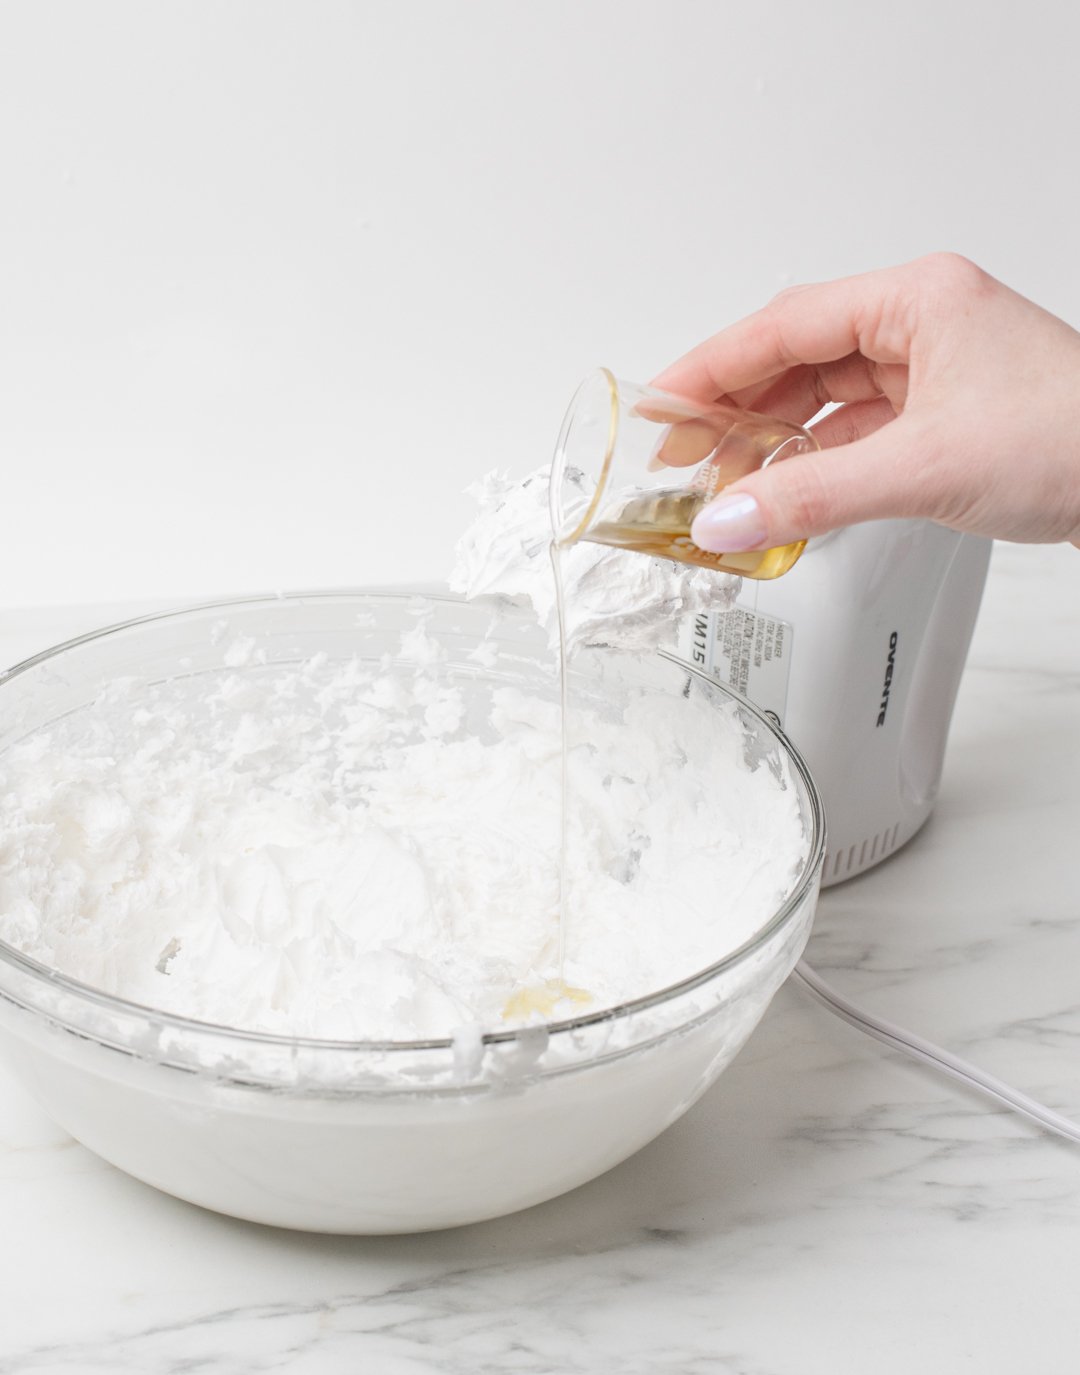 Pouring essential oil into whipped soap.